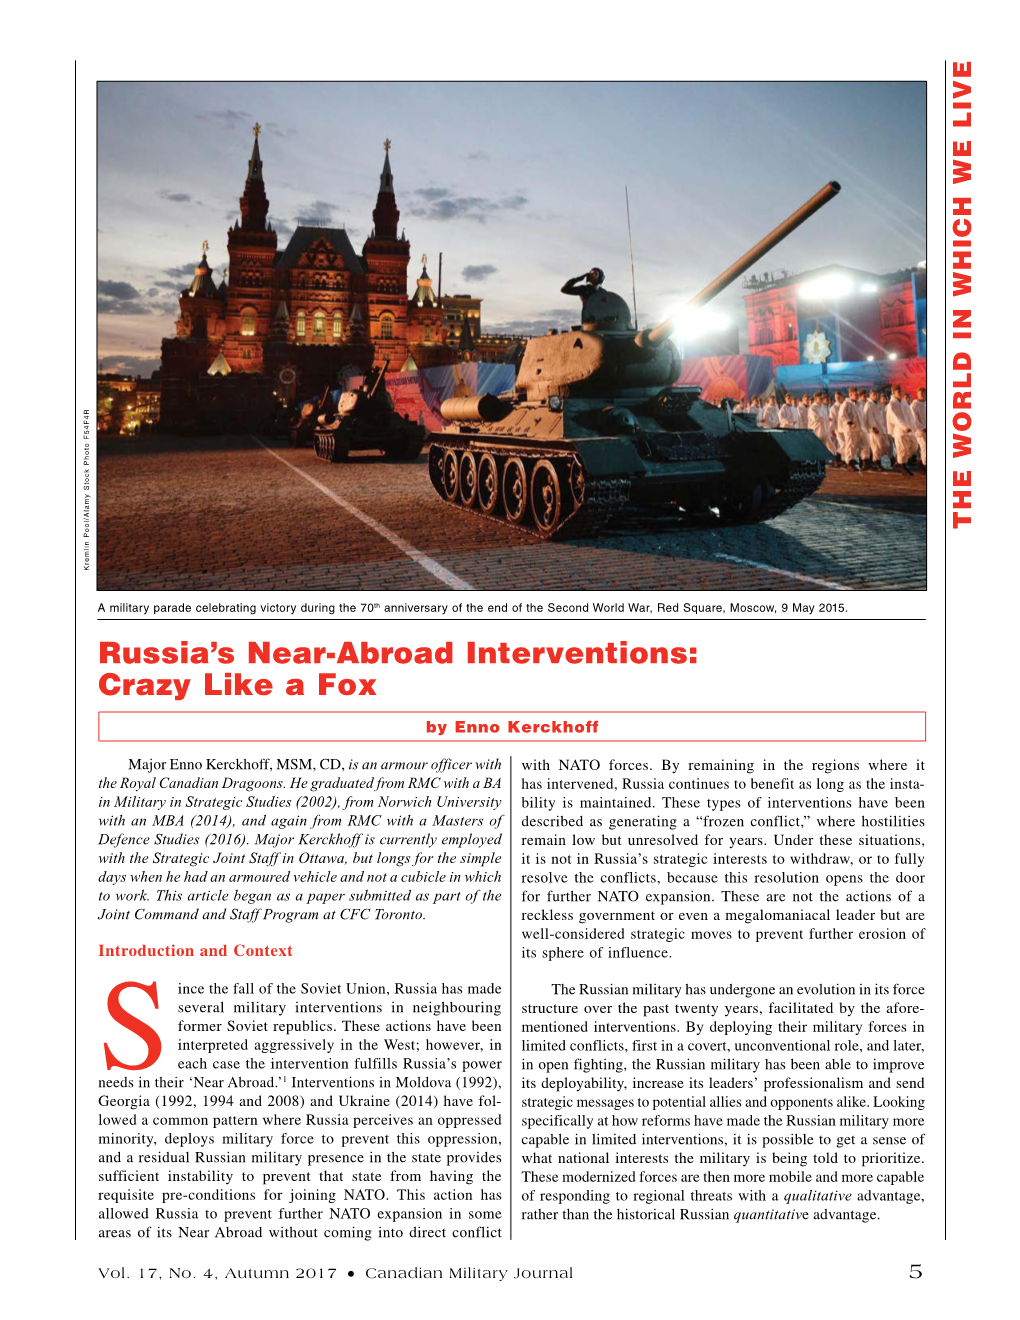 Russia's Near-Abroad Interventions: Crazy Like A